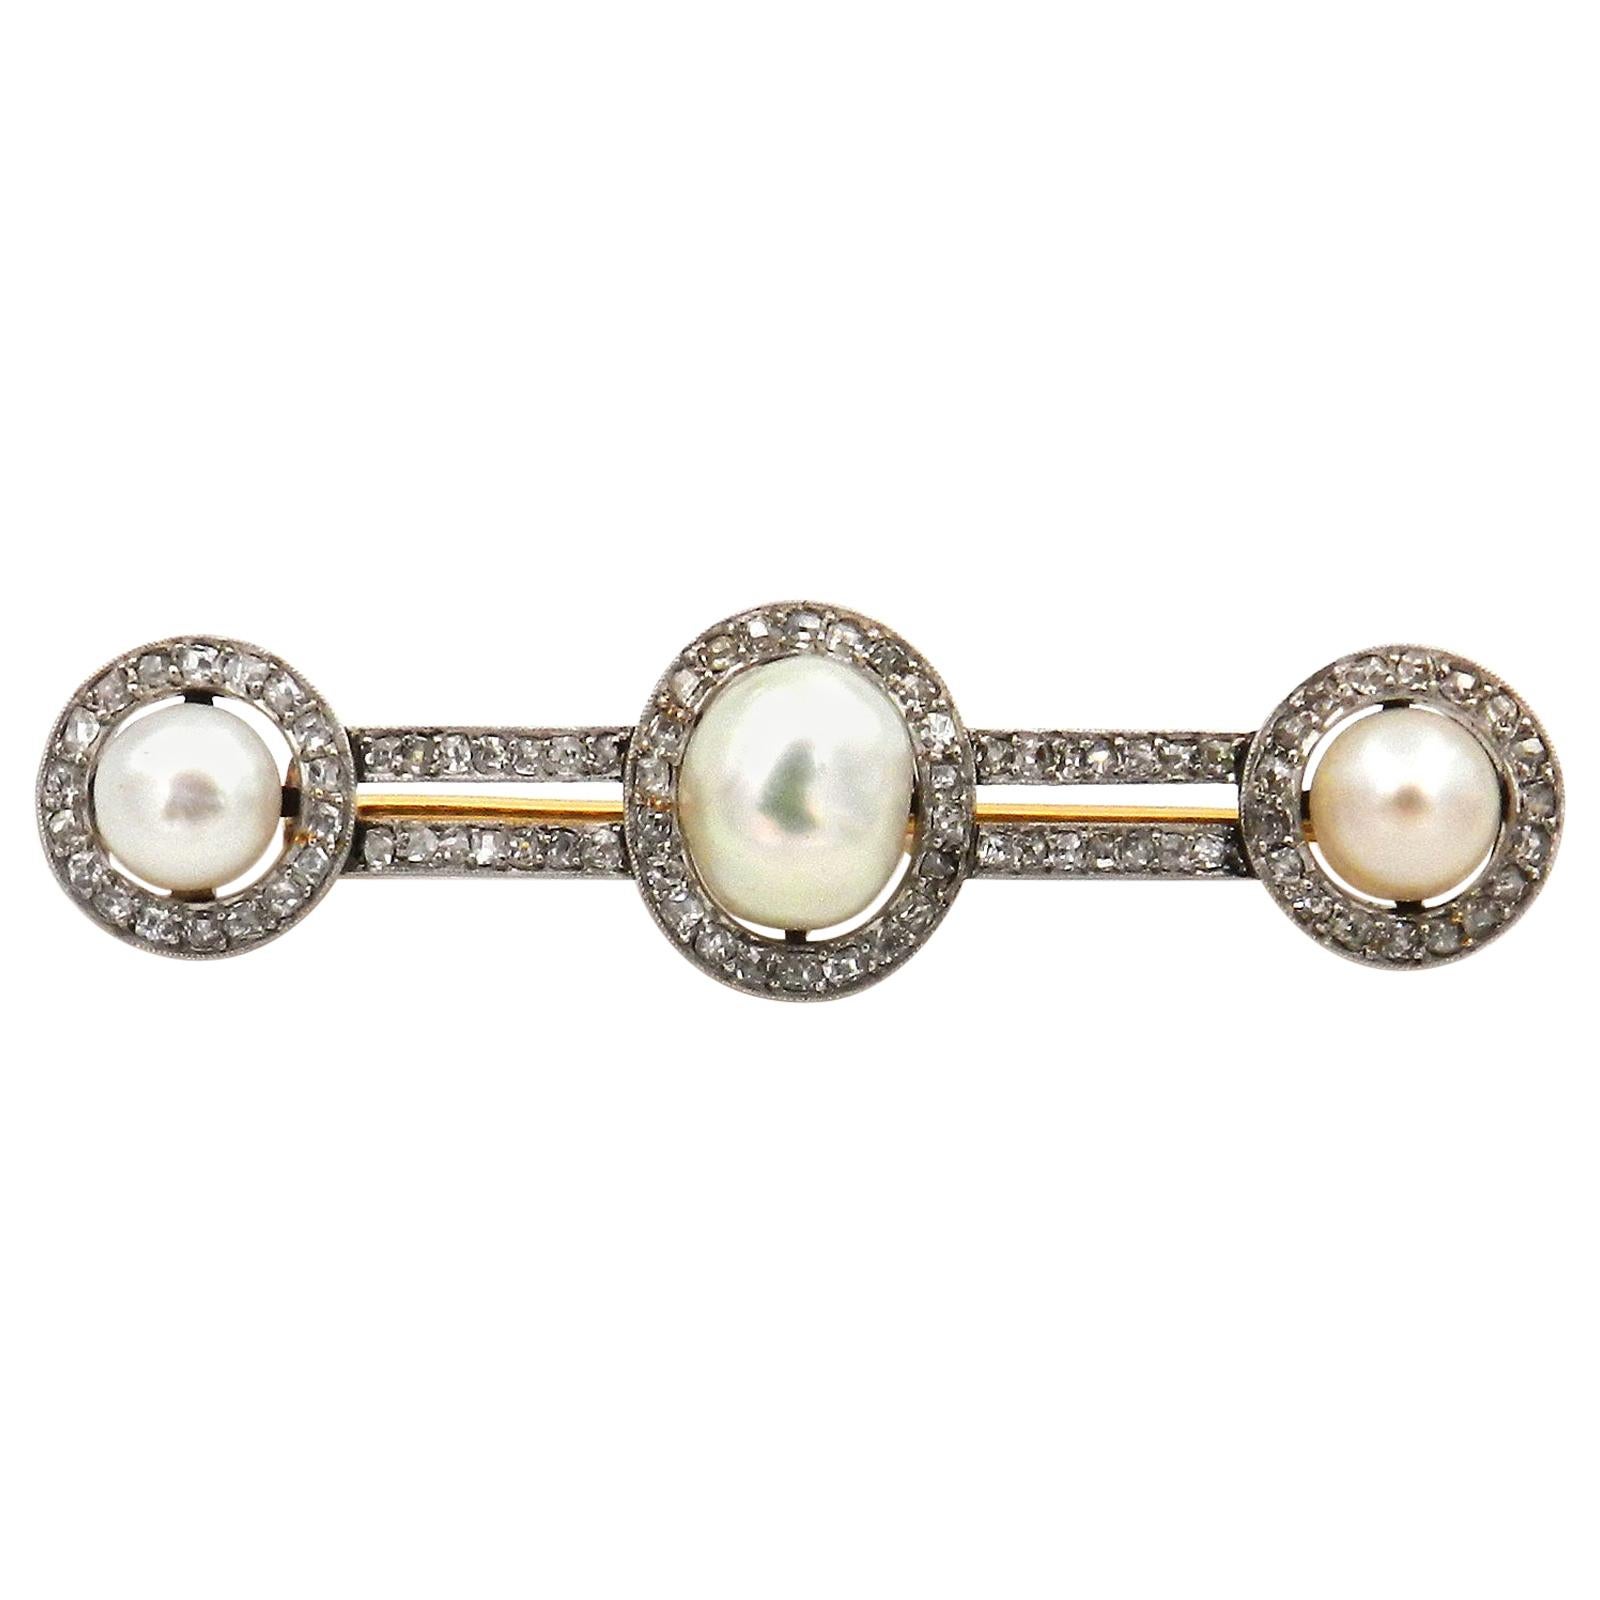 Art Deco Natural Pearl Diamond Brooch in Platinum and 18 Karat Gold, circa 1920 For Sale